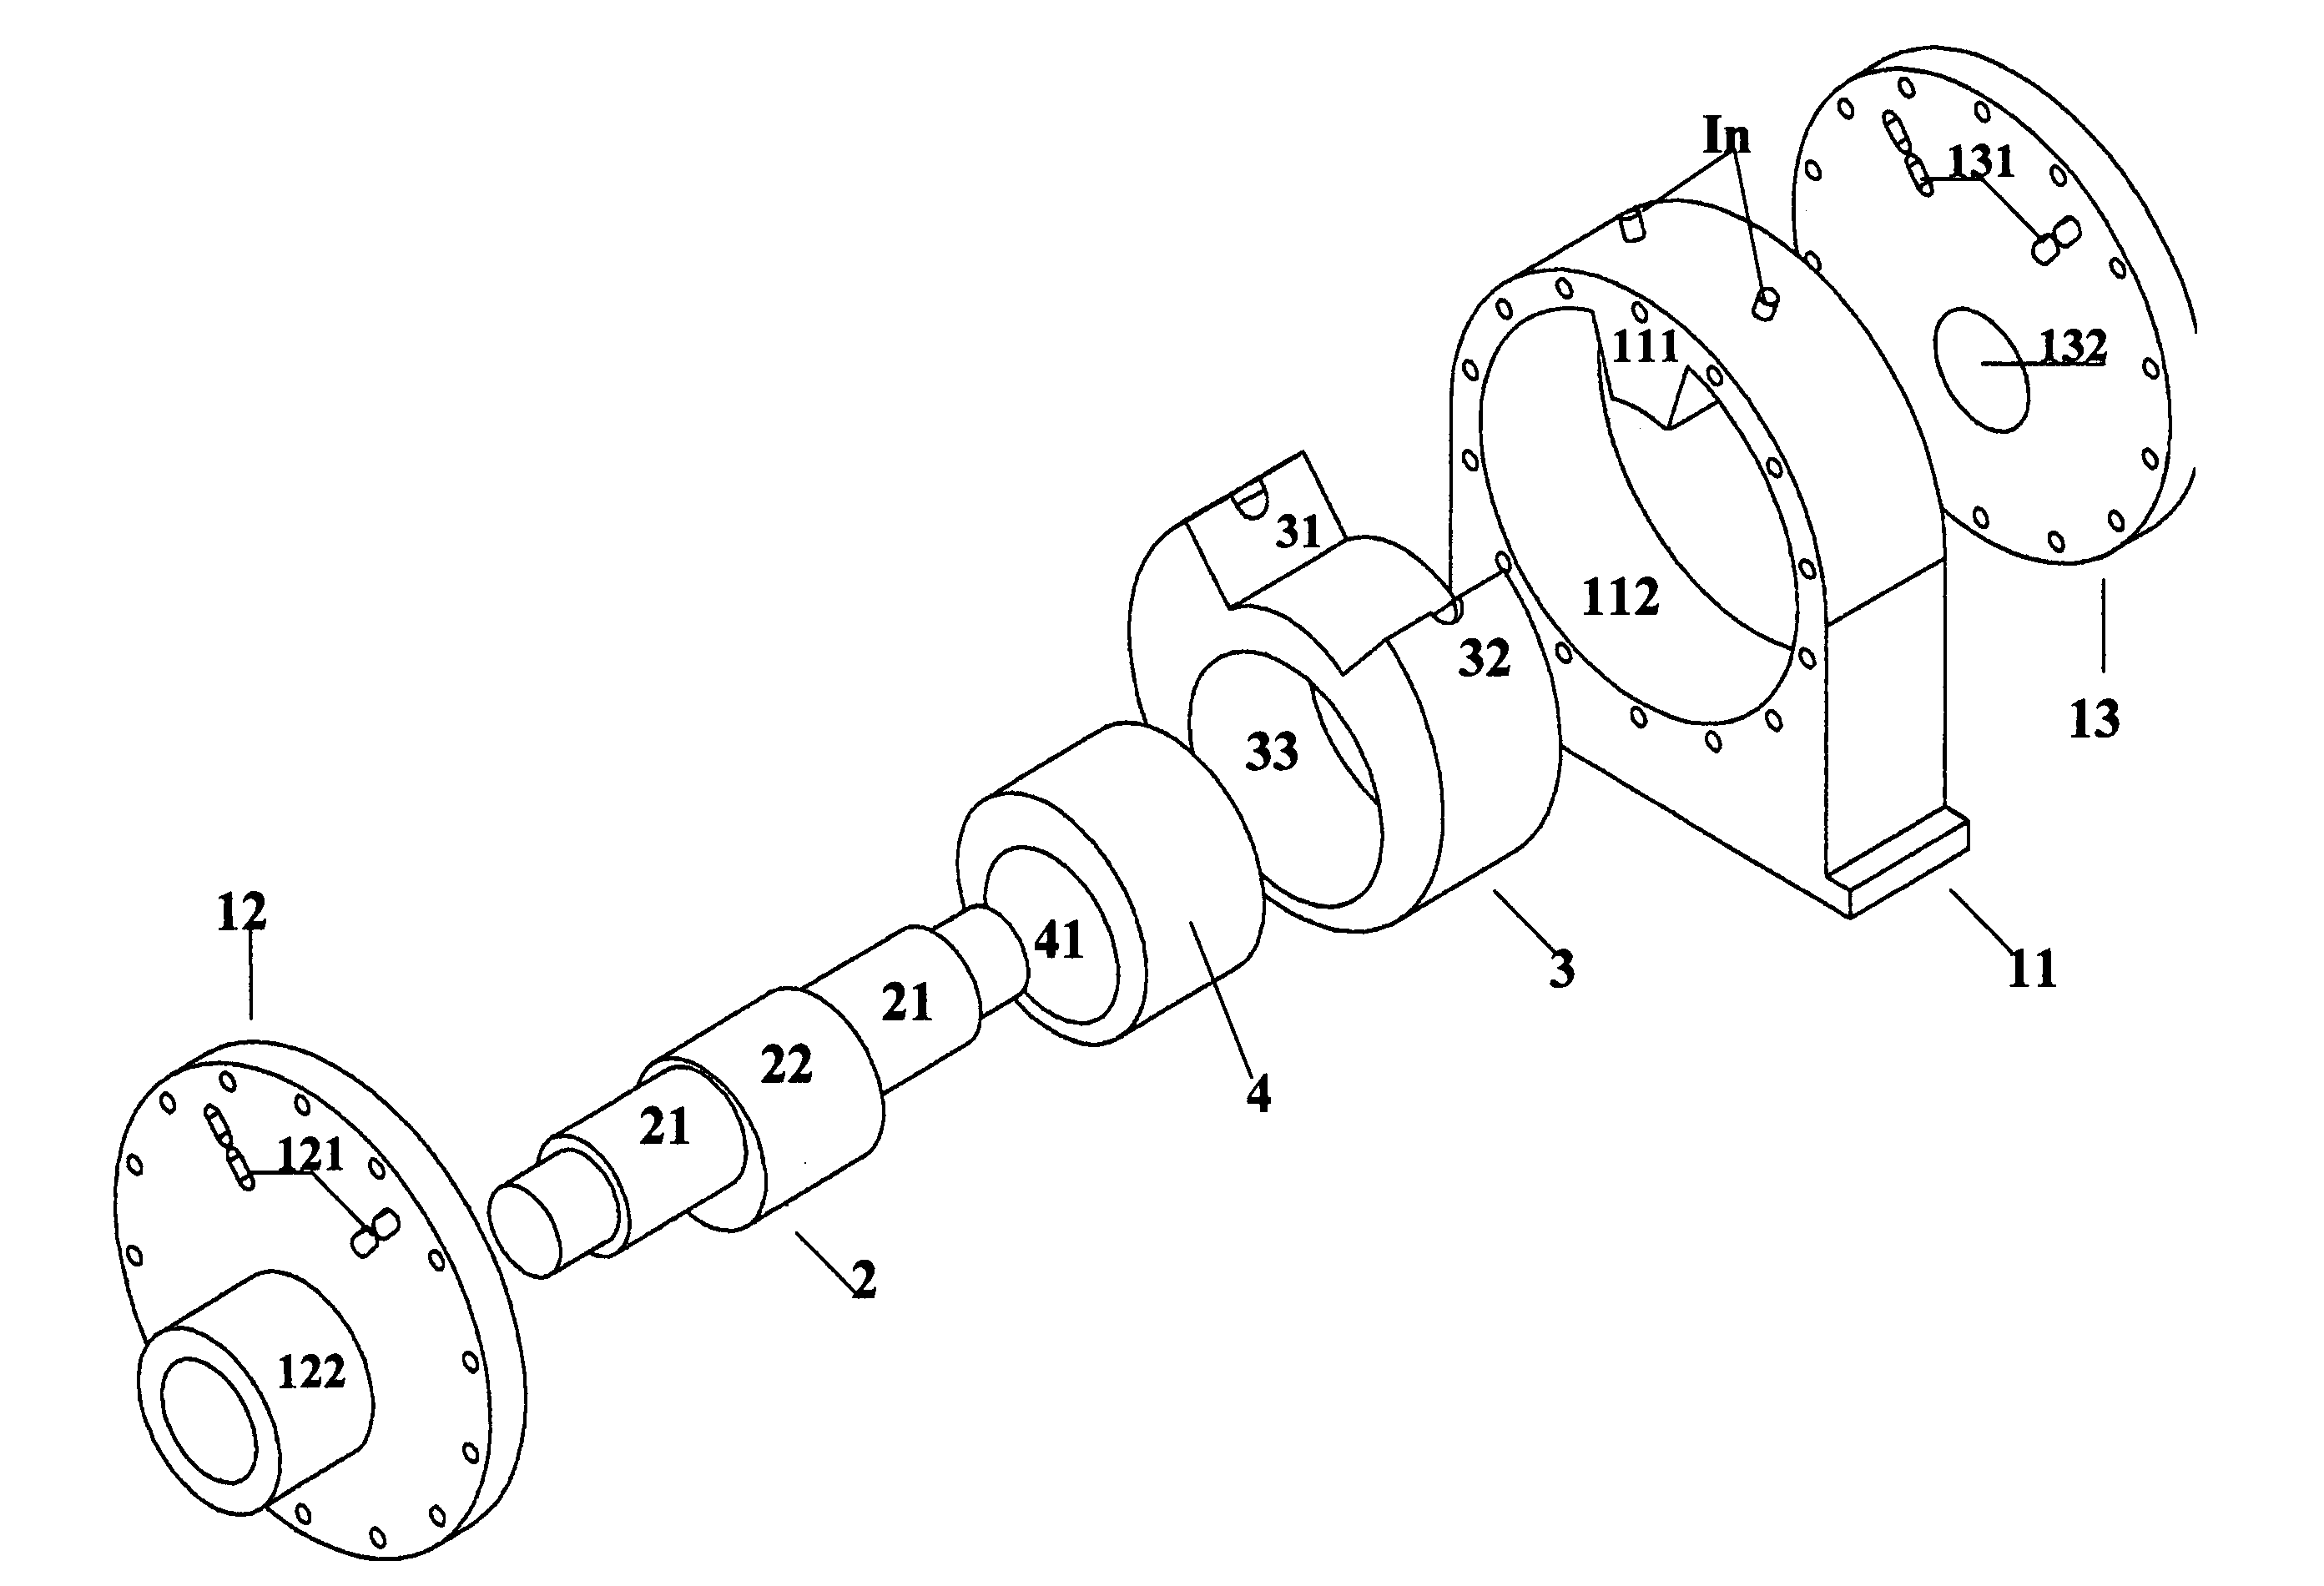 Internal combustion two stroke oscillating engine